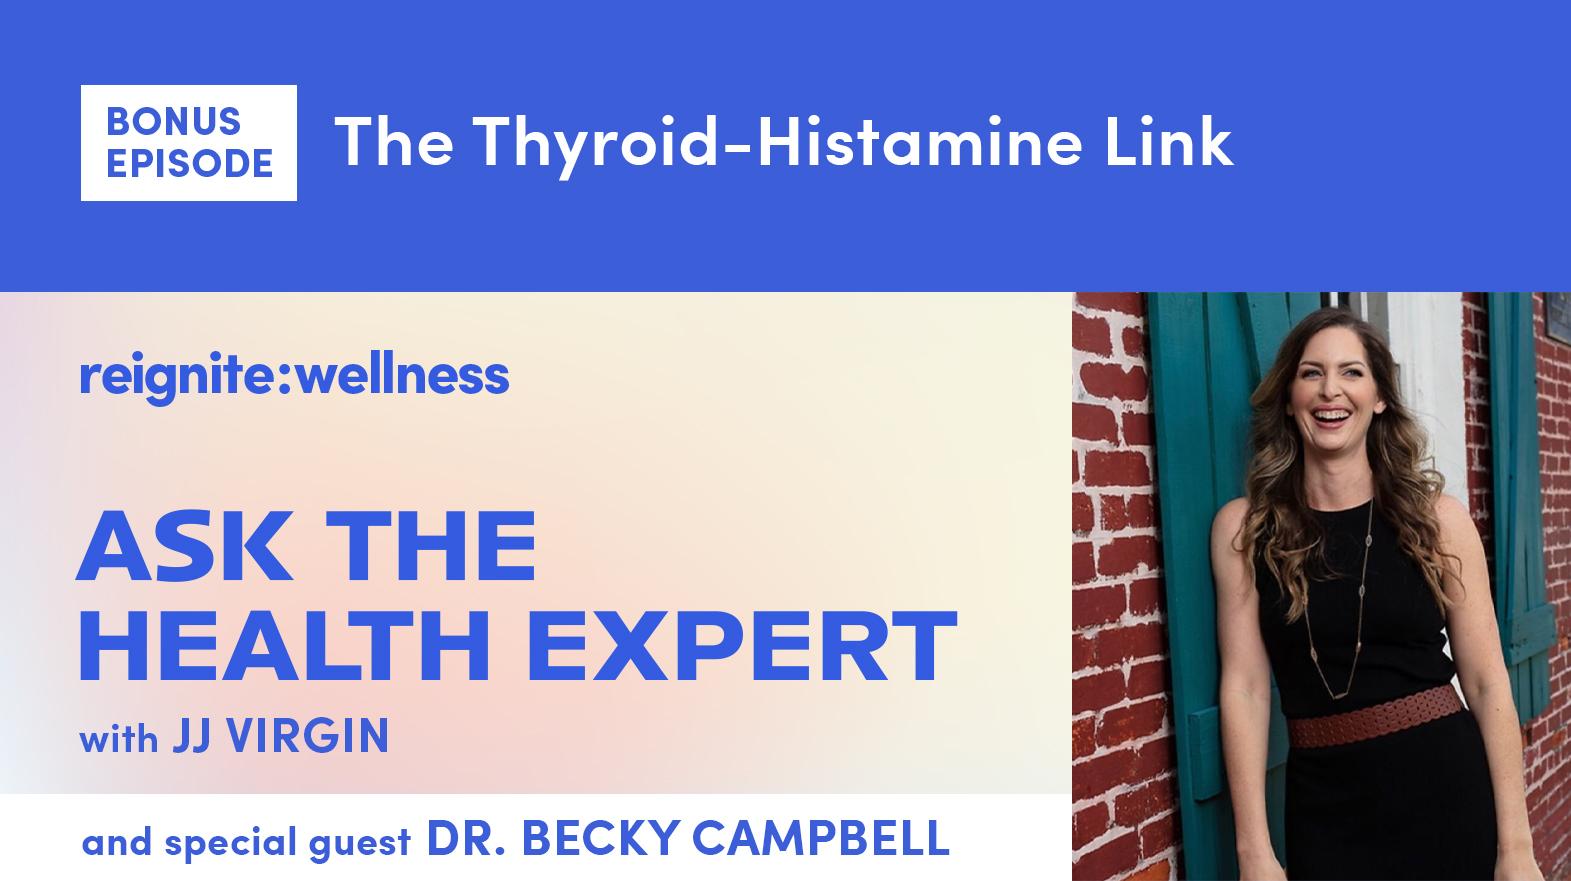 [Bonus Episode] The Thyroid-Histamine Link with Dr. Becky Campbell | Ep. 370